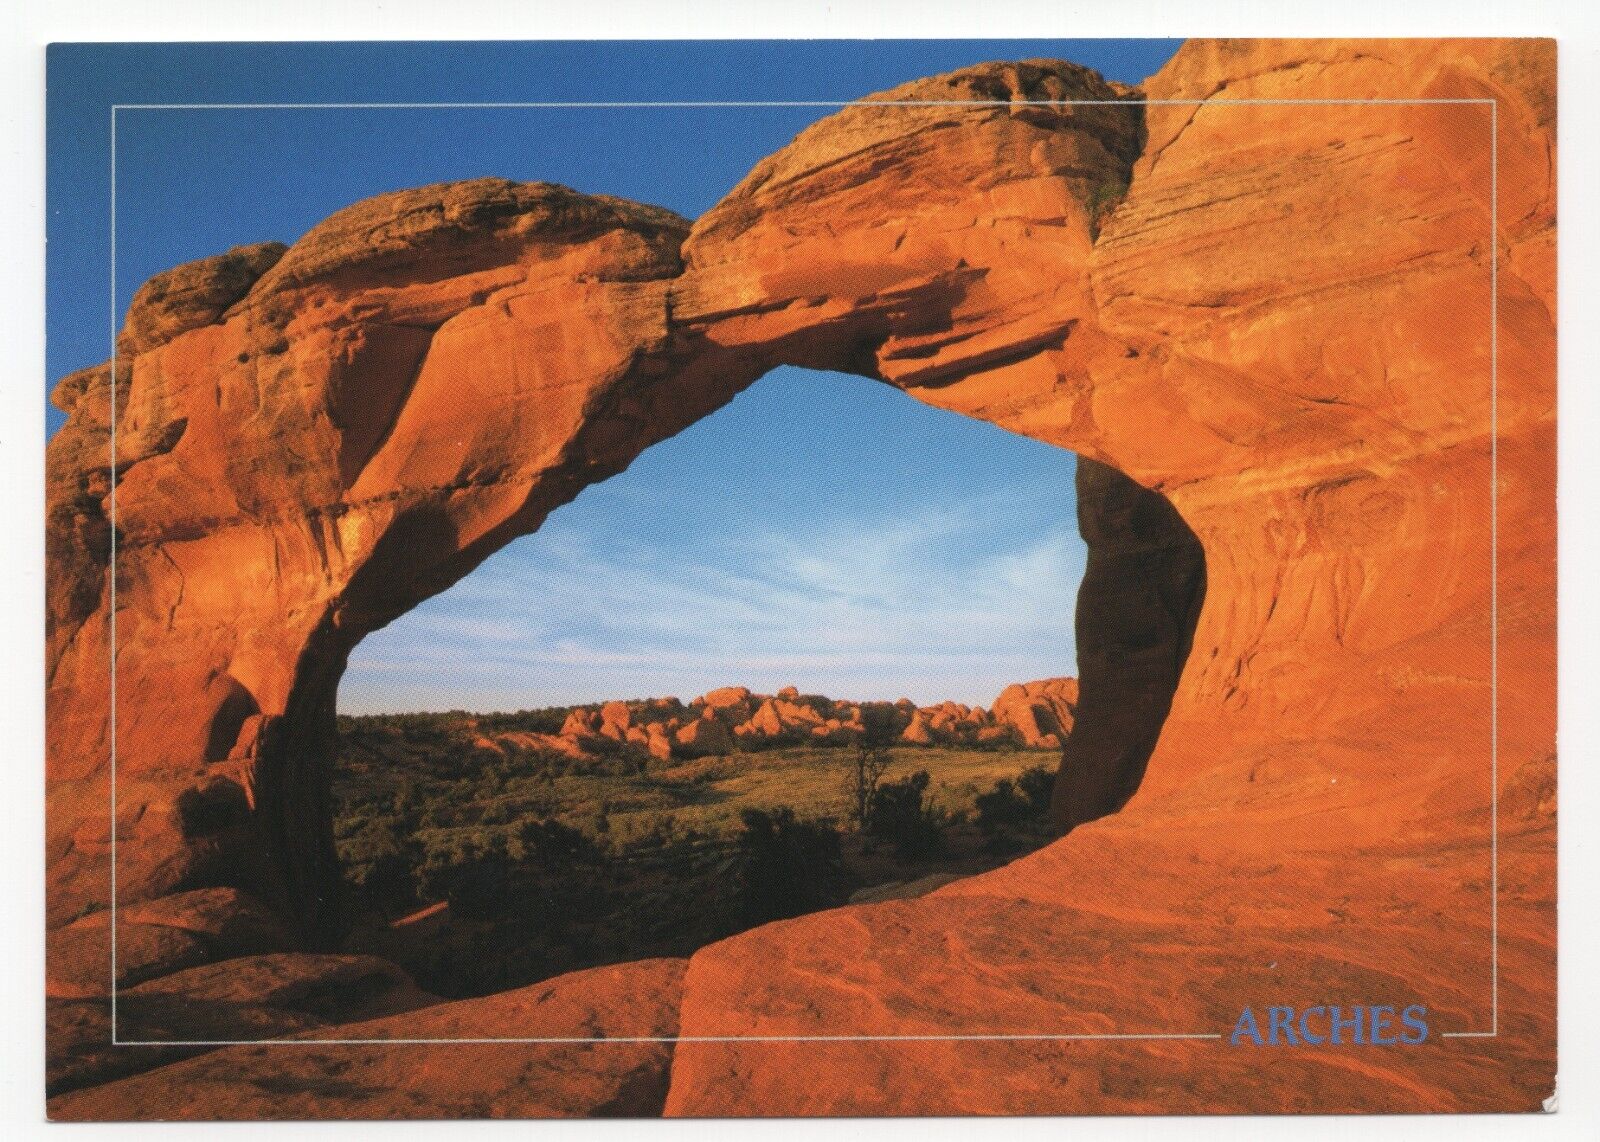 Postcard - Broken Arch #14014, Arches National Park, UT - Unposted